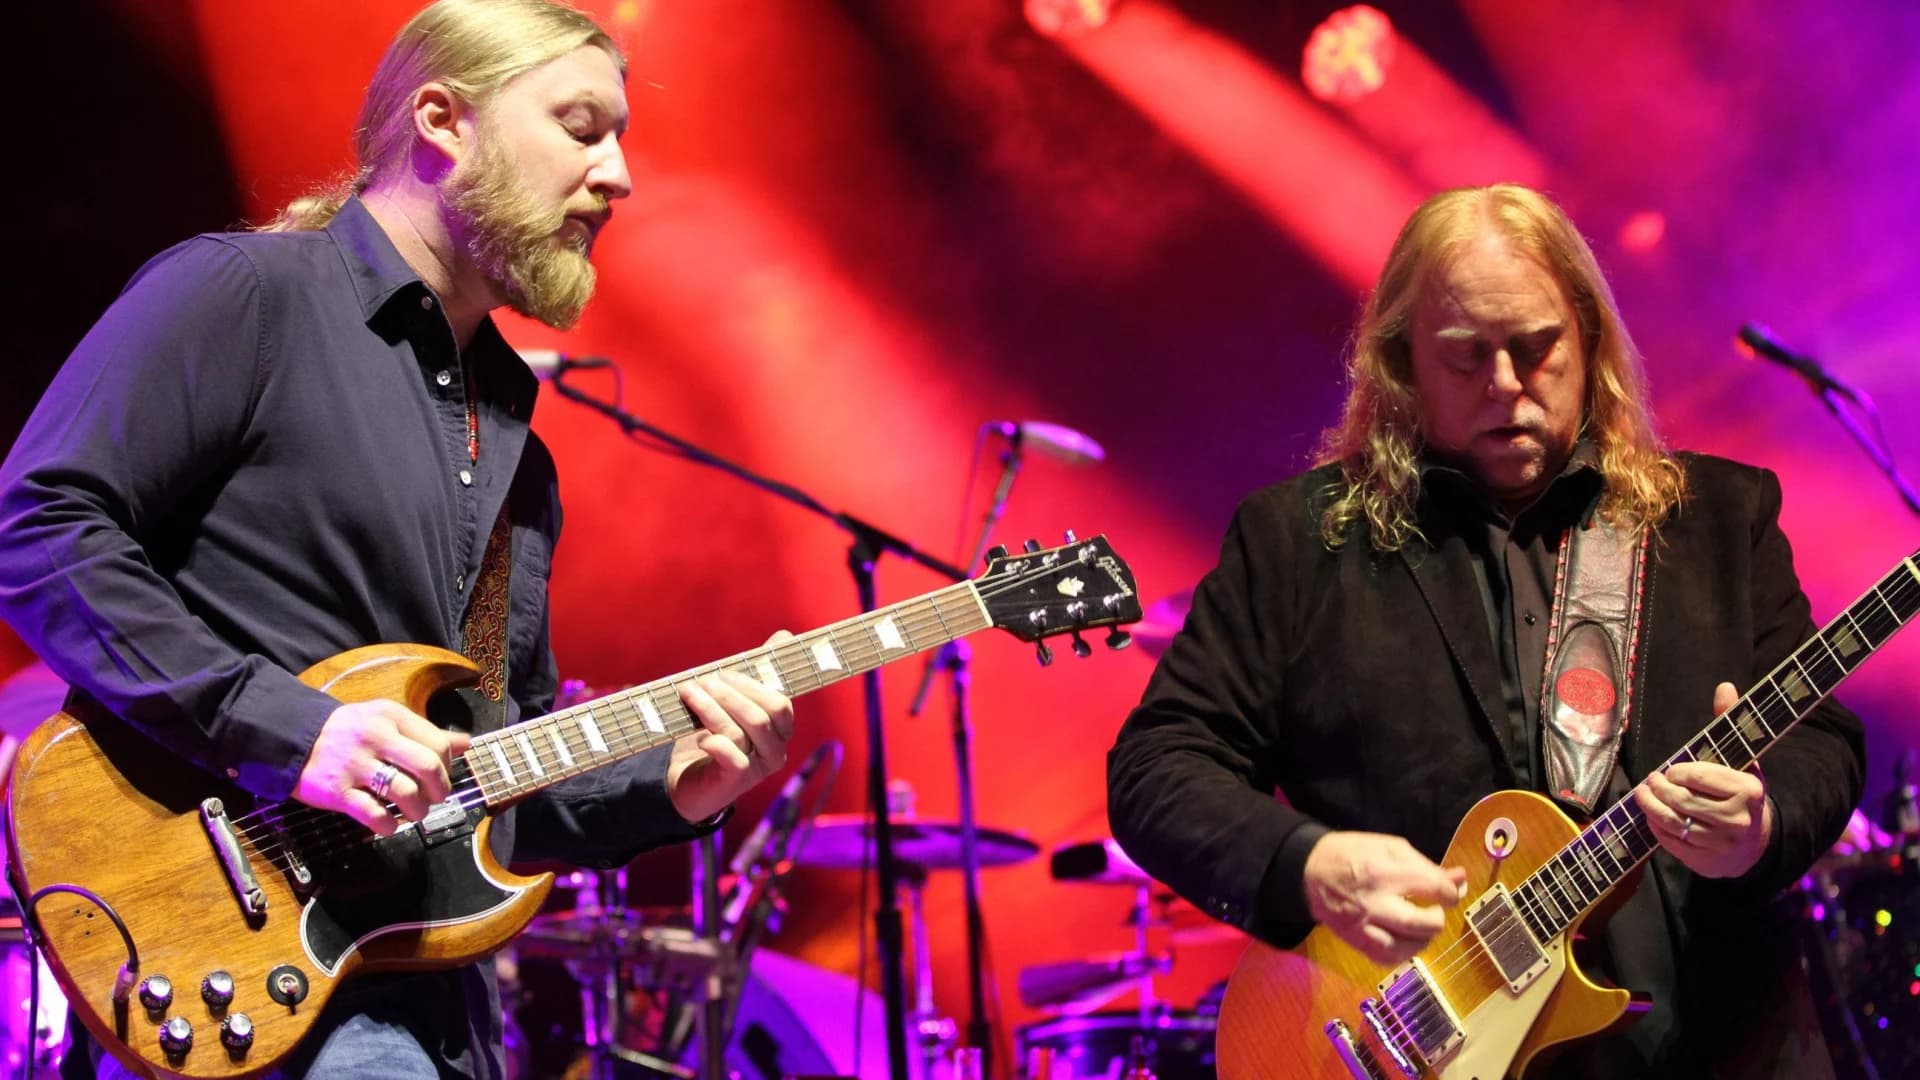 The Brothers - Celebrating 50 Years of the Allman Brothers at MSG